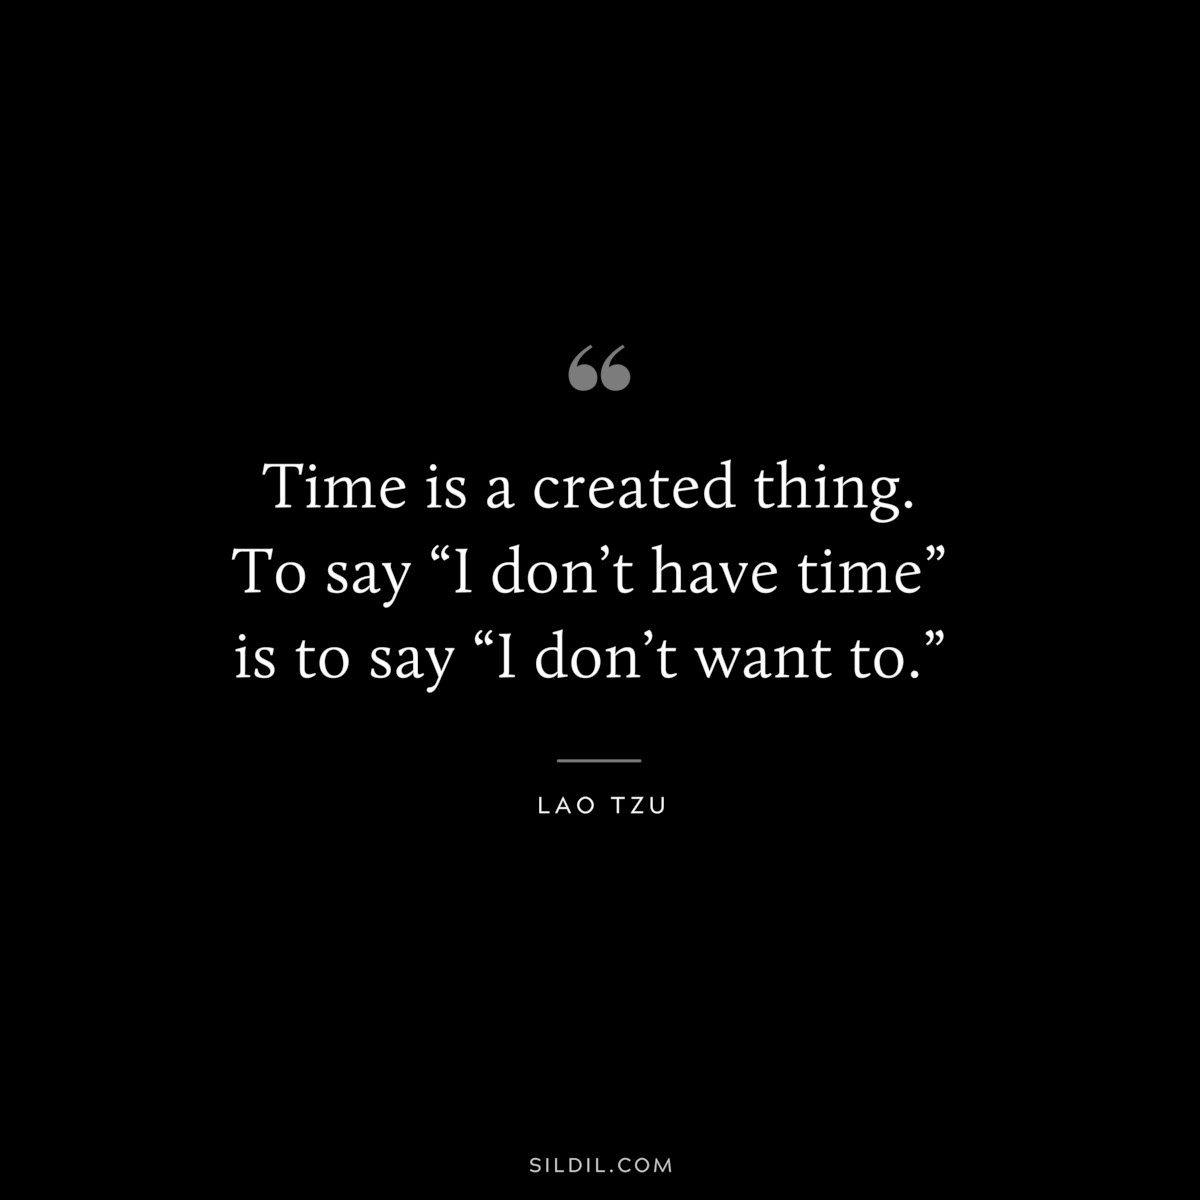 Time is a created thing. To say “I don’t have time” is to say “I don’t want to.” ― Lao Tzu